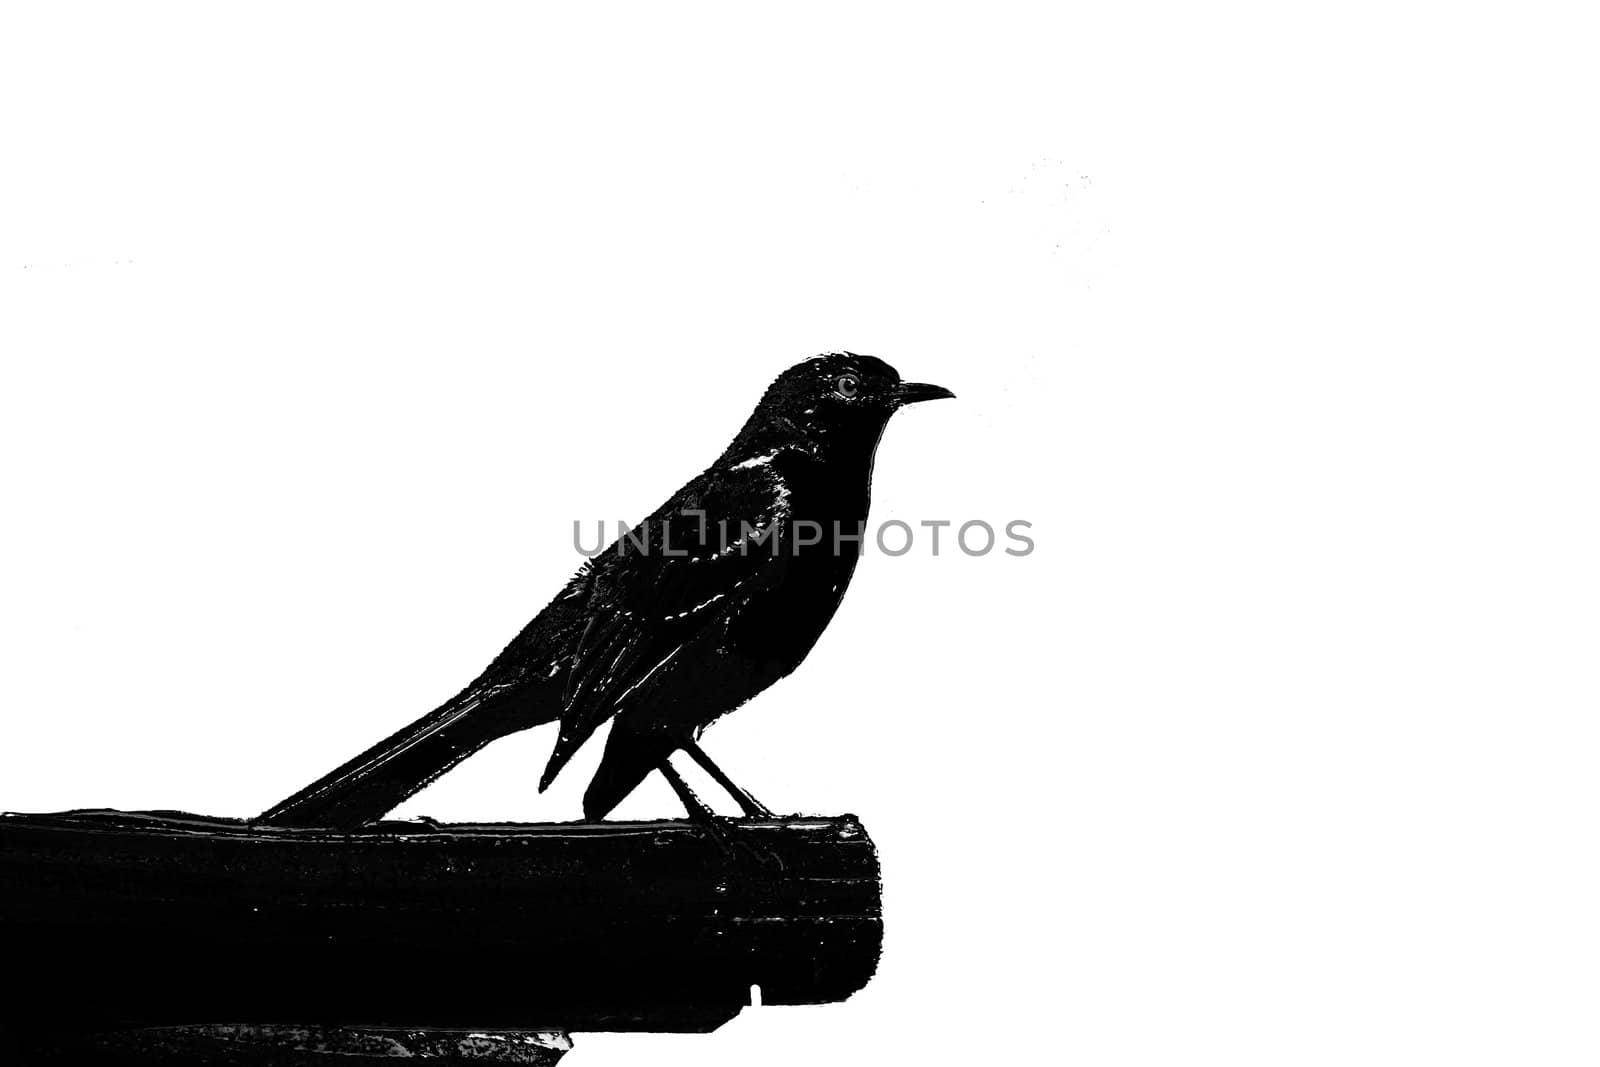 Silhouette of a finch perched on a rafter